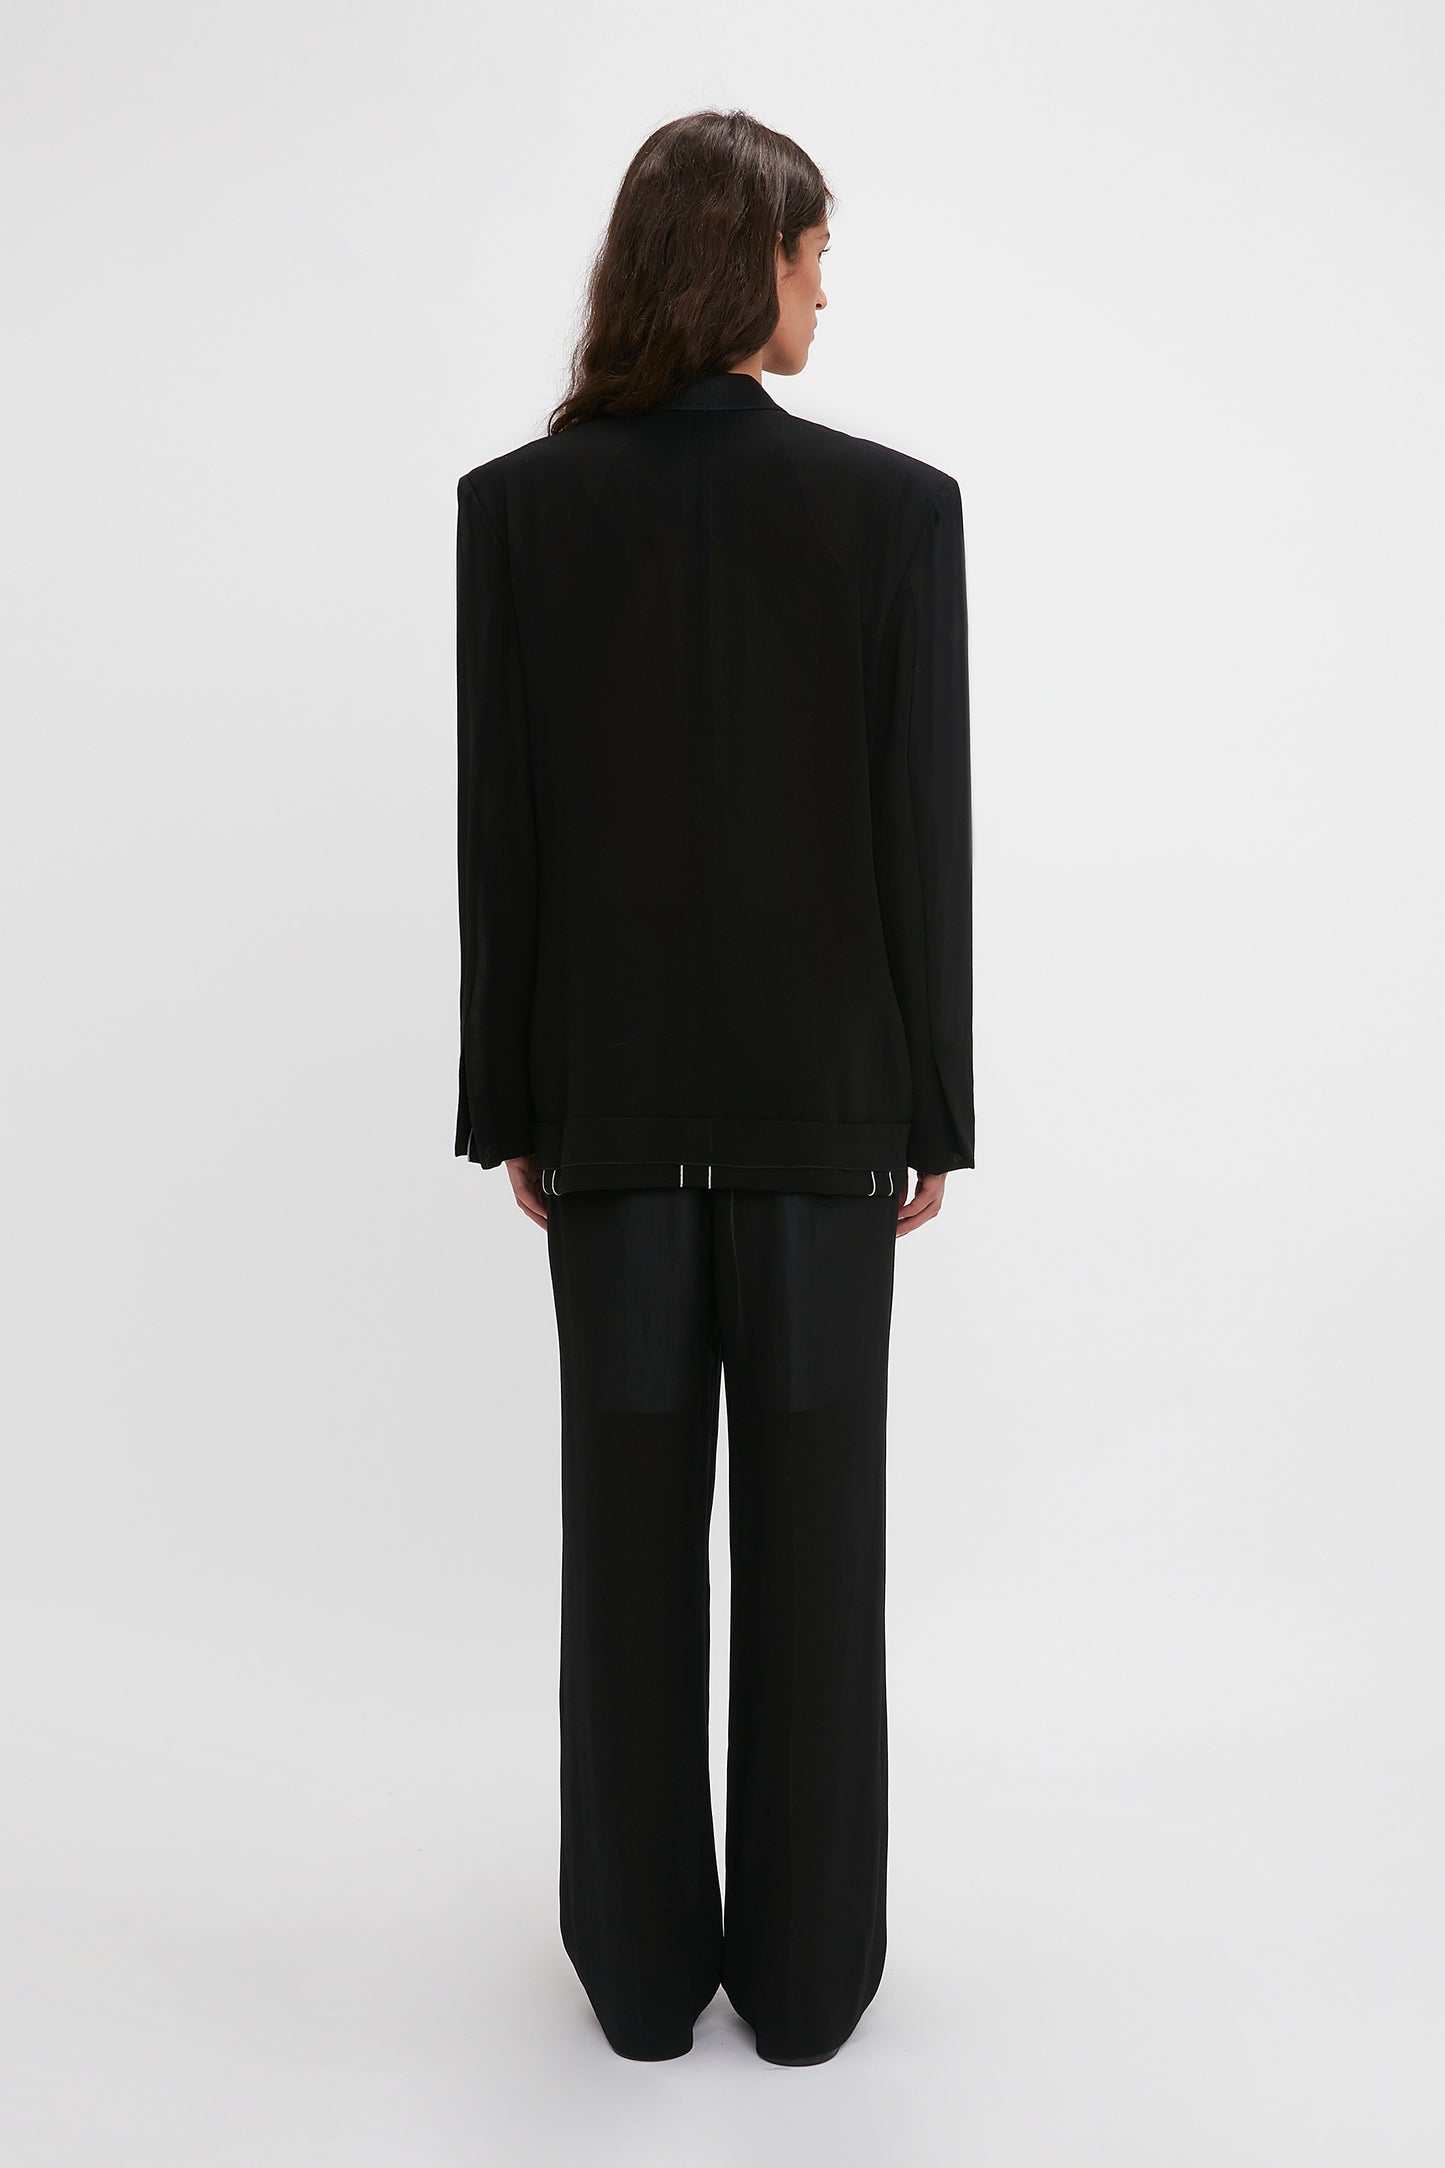 Woman in an elegant Victoria Beckham black pantsuit with waistband detail straight leg trousers, standing with her back to the camera against a white background.